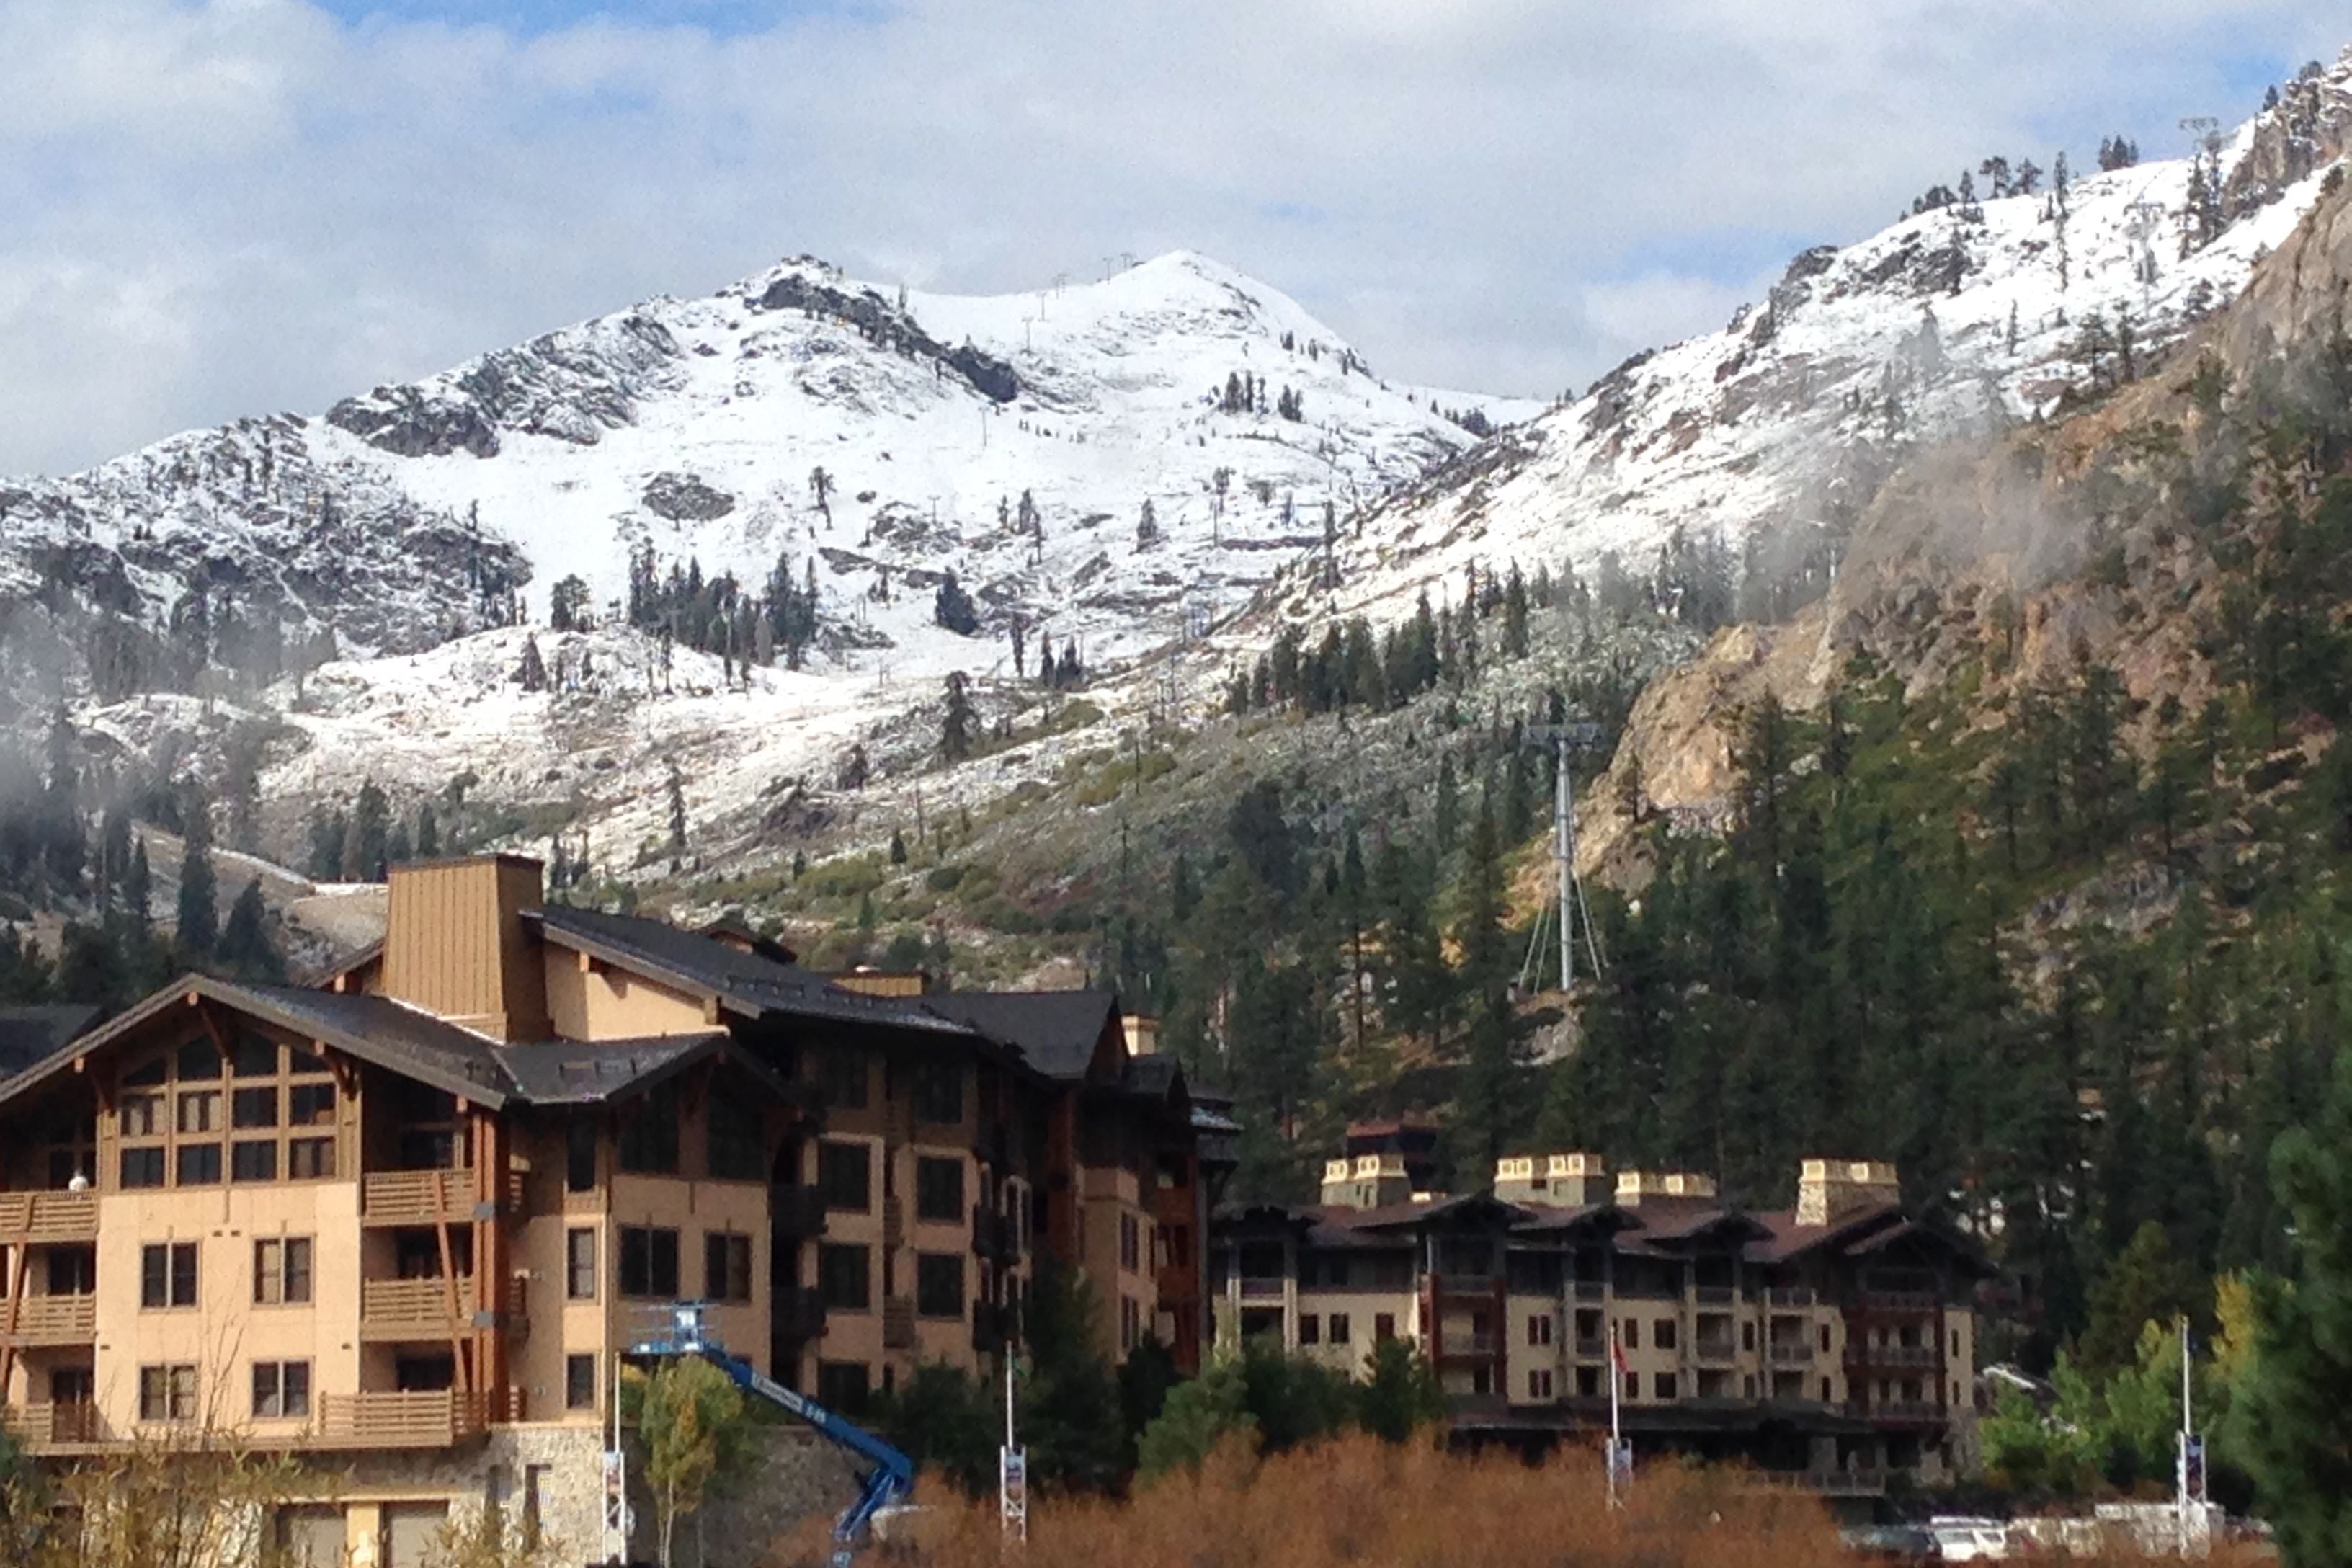 Snow in Squaw Valley, CA in September 2014. photo: skiing-blog.com